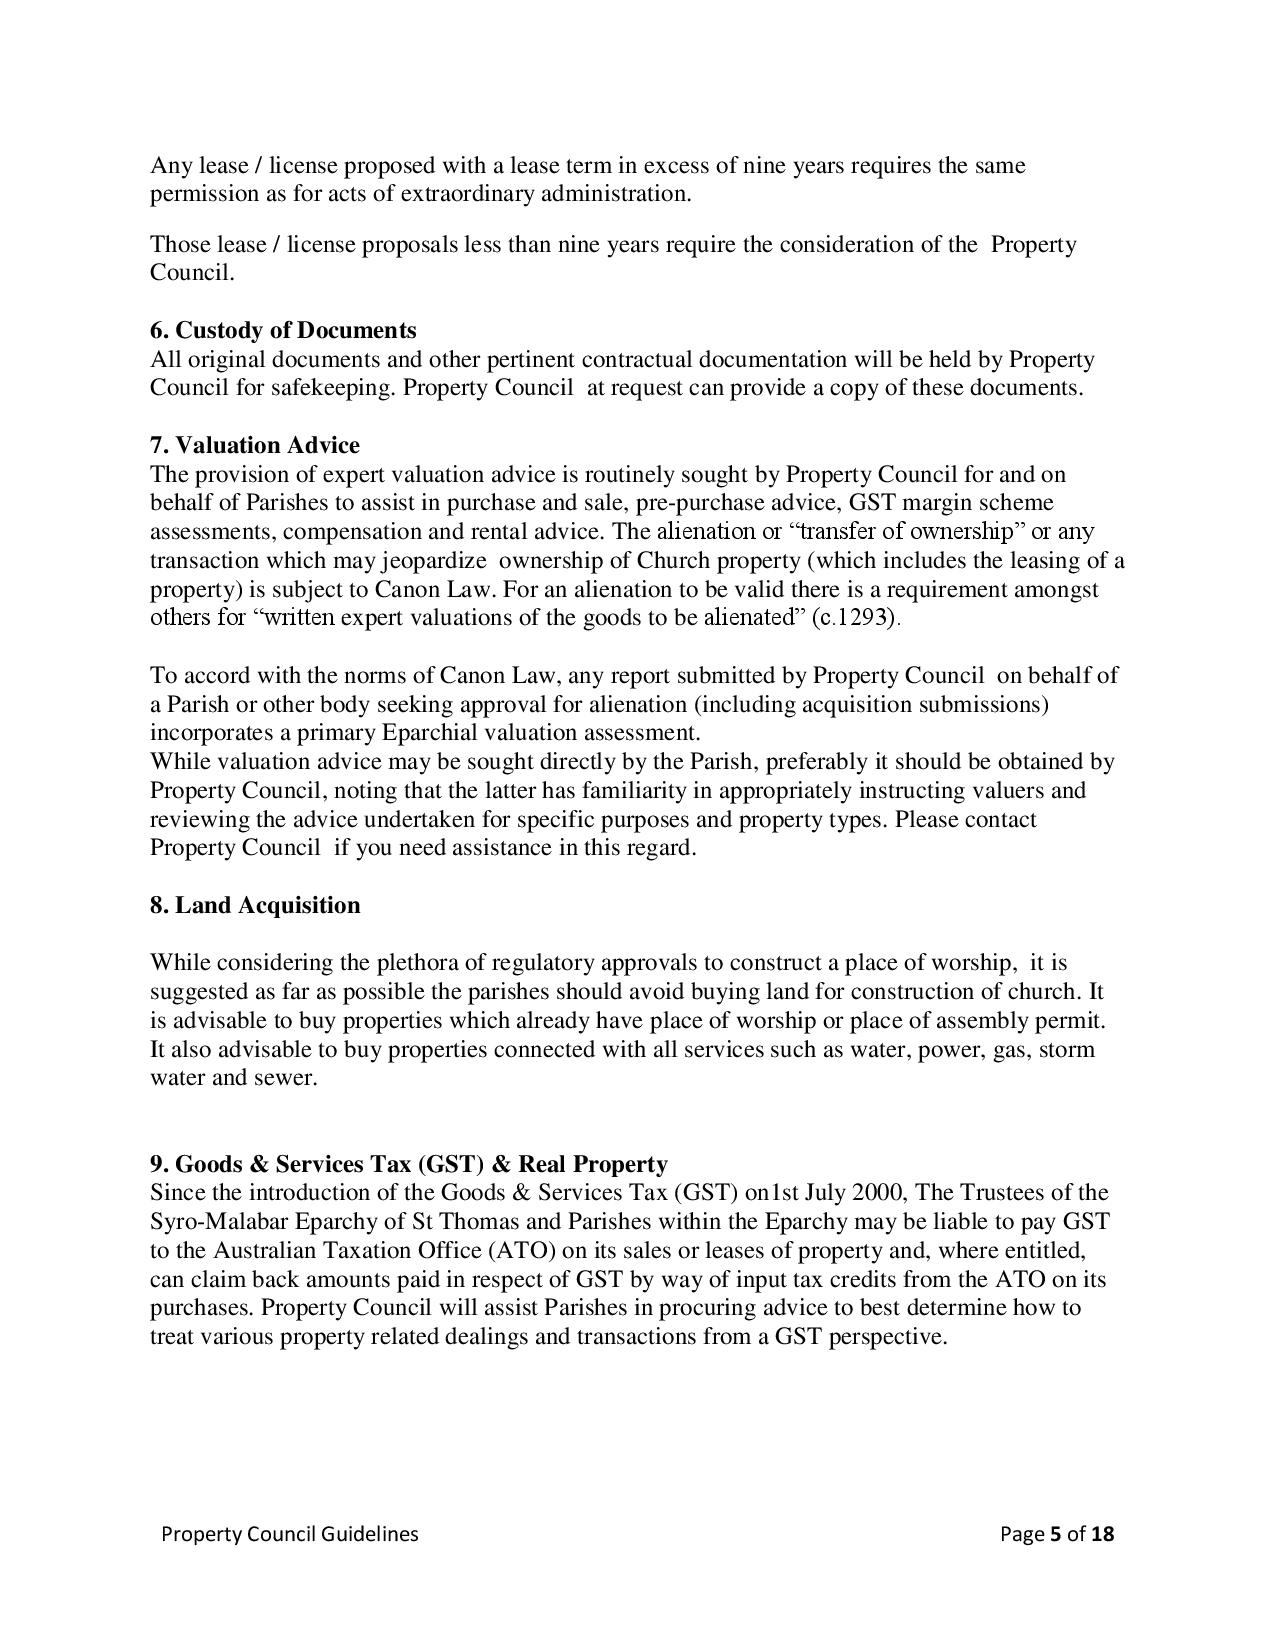 property-council-guidlines-v2-4-page-005